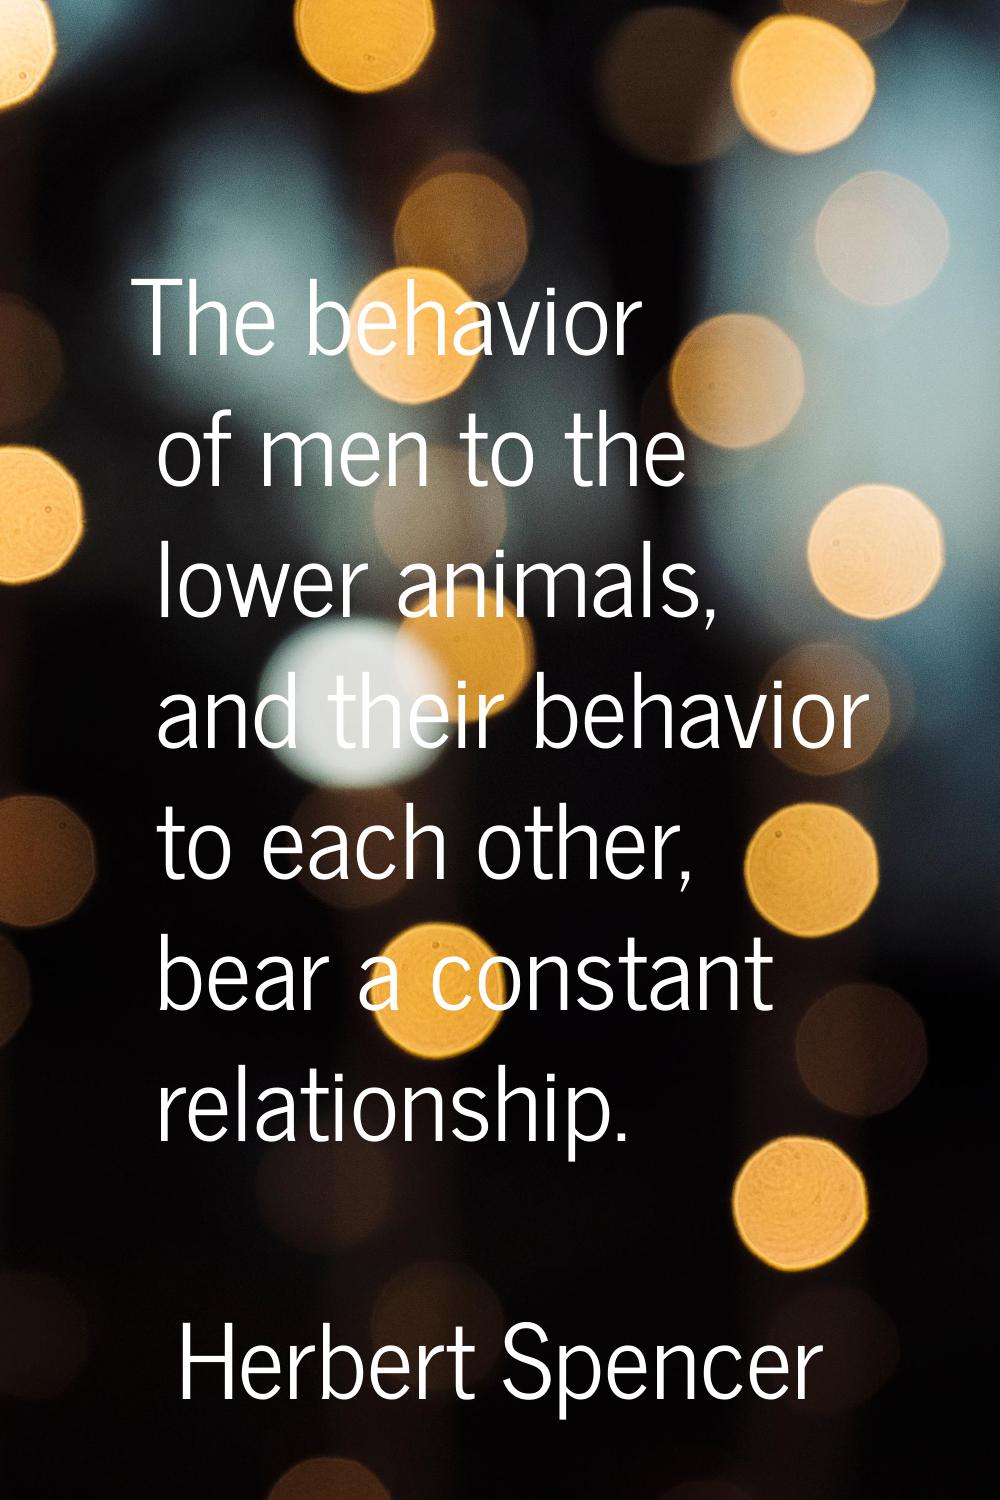 The behavior of men to the lower animals, and their behavior to each other, bear a constant relatio